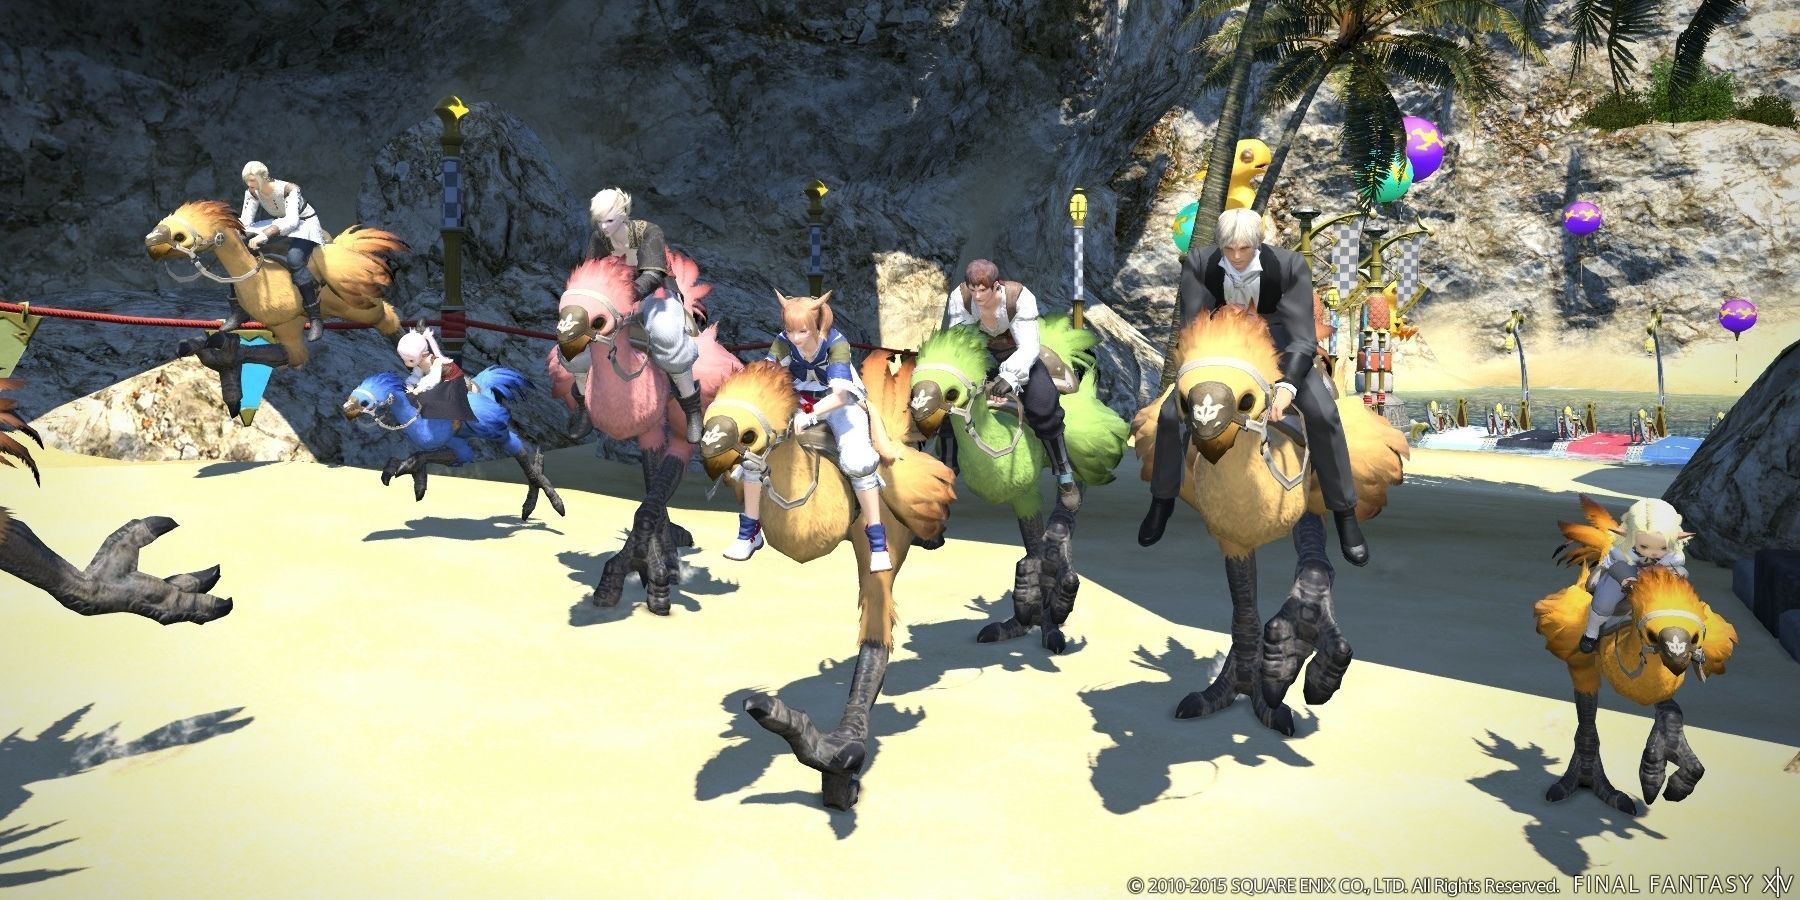 Final Fantasy XIV Chocobo racing showing many players and Chocobo racing together in a beach area